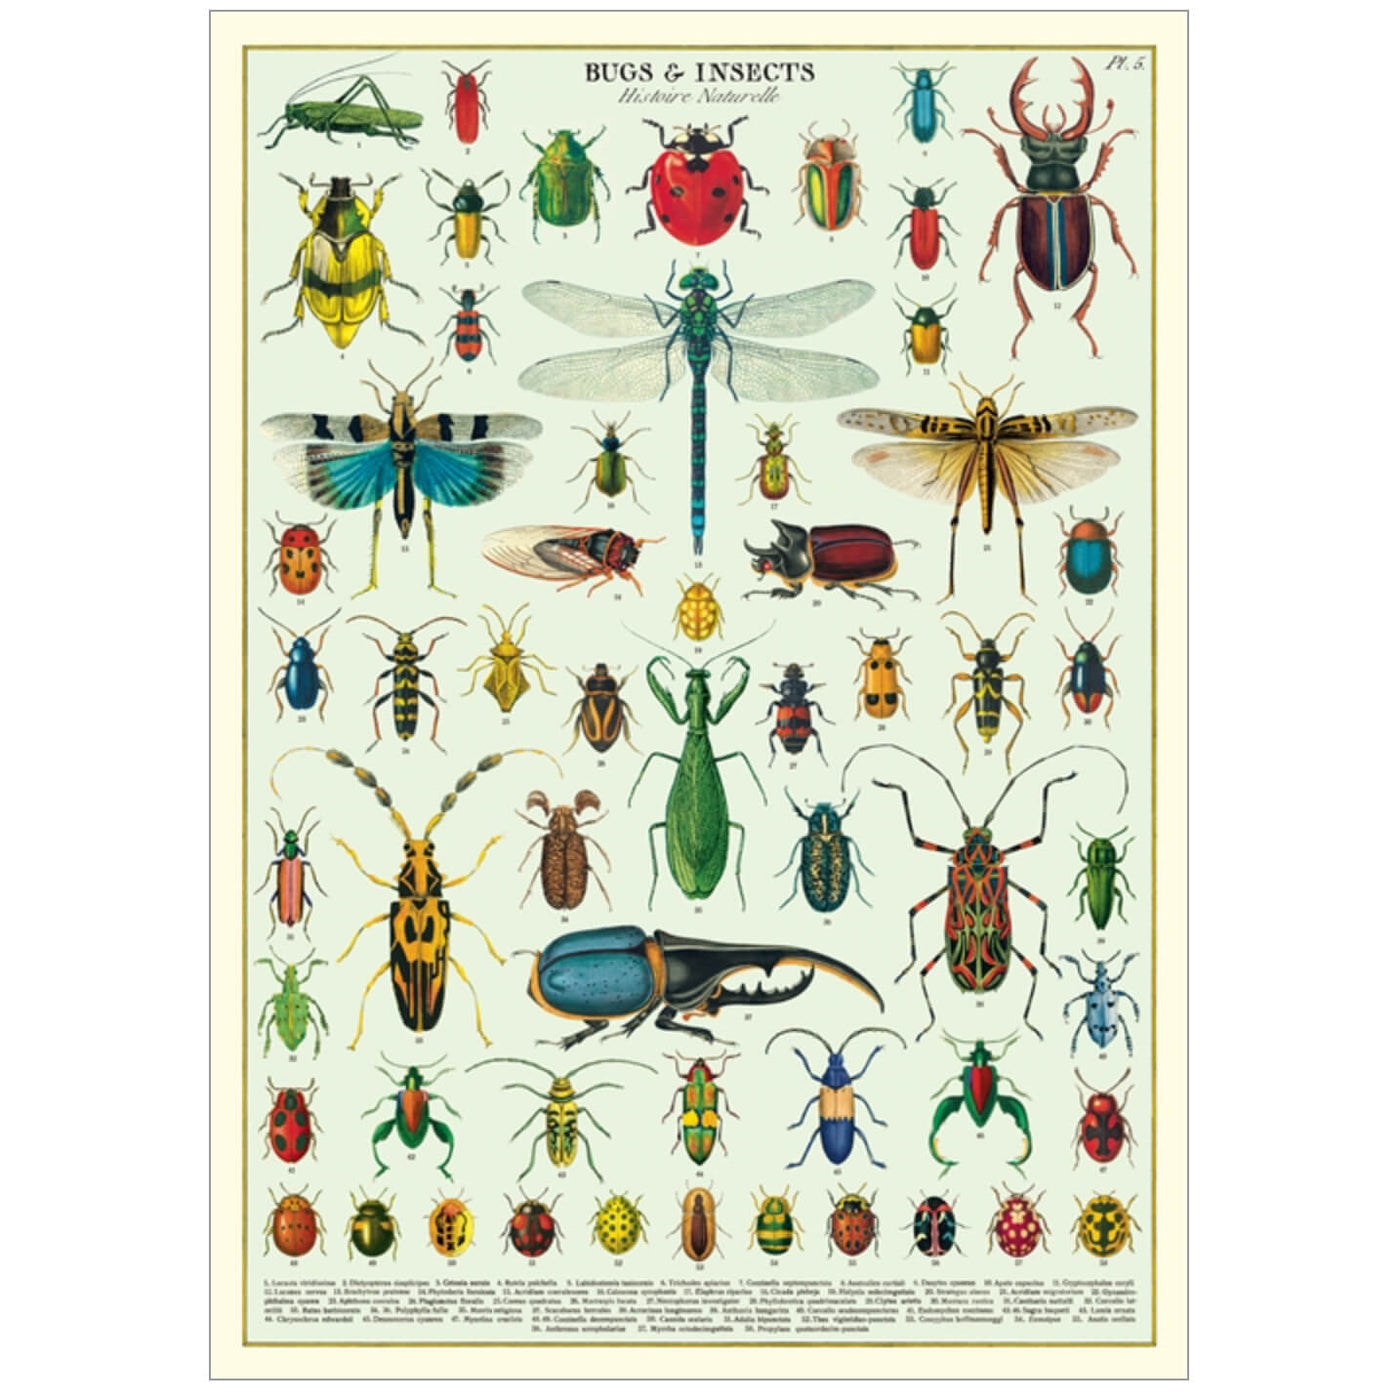 Bugs and insects poster wrap sheet